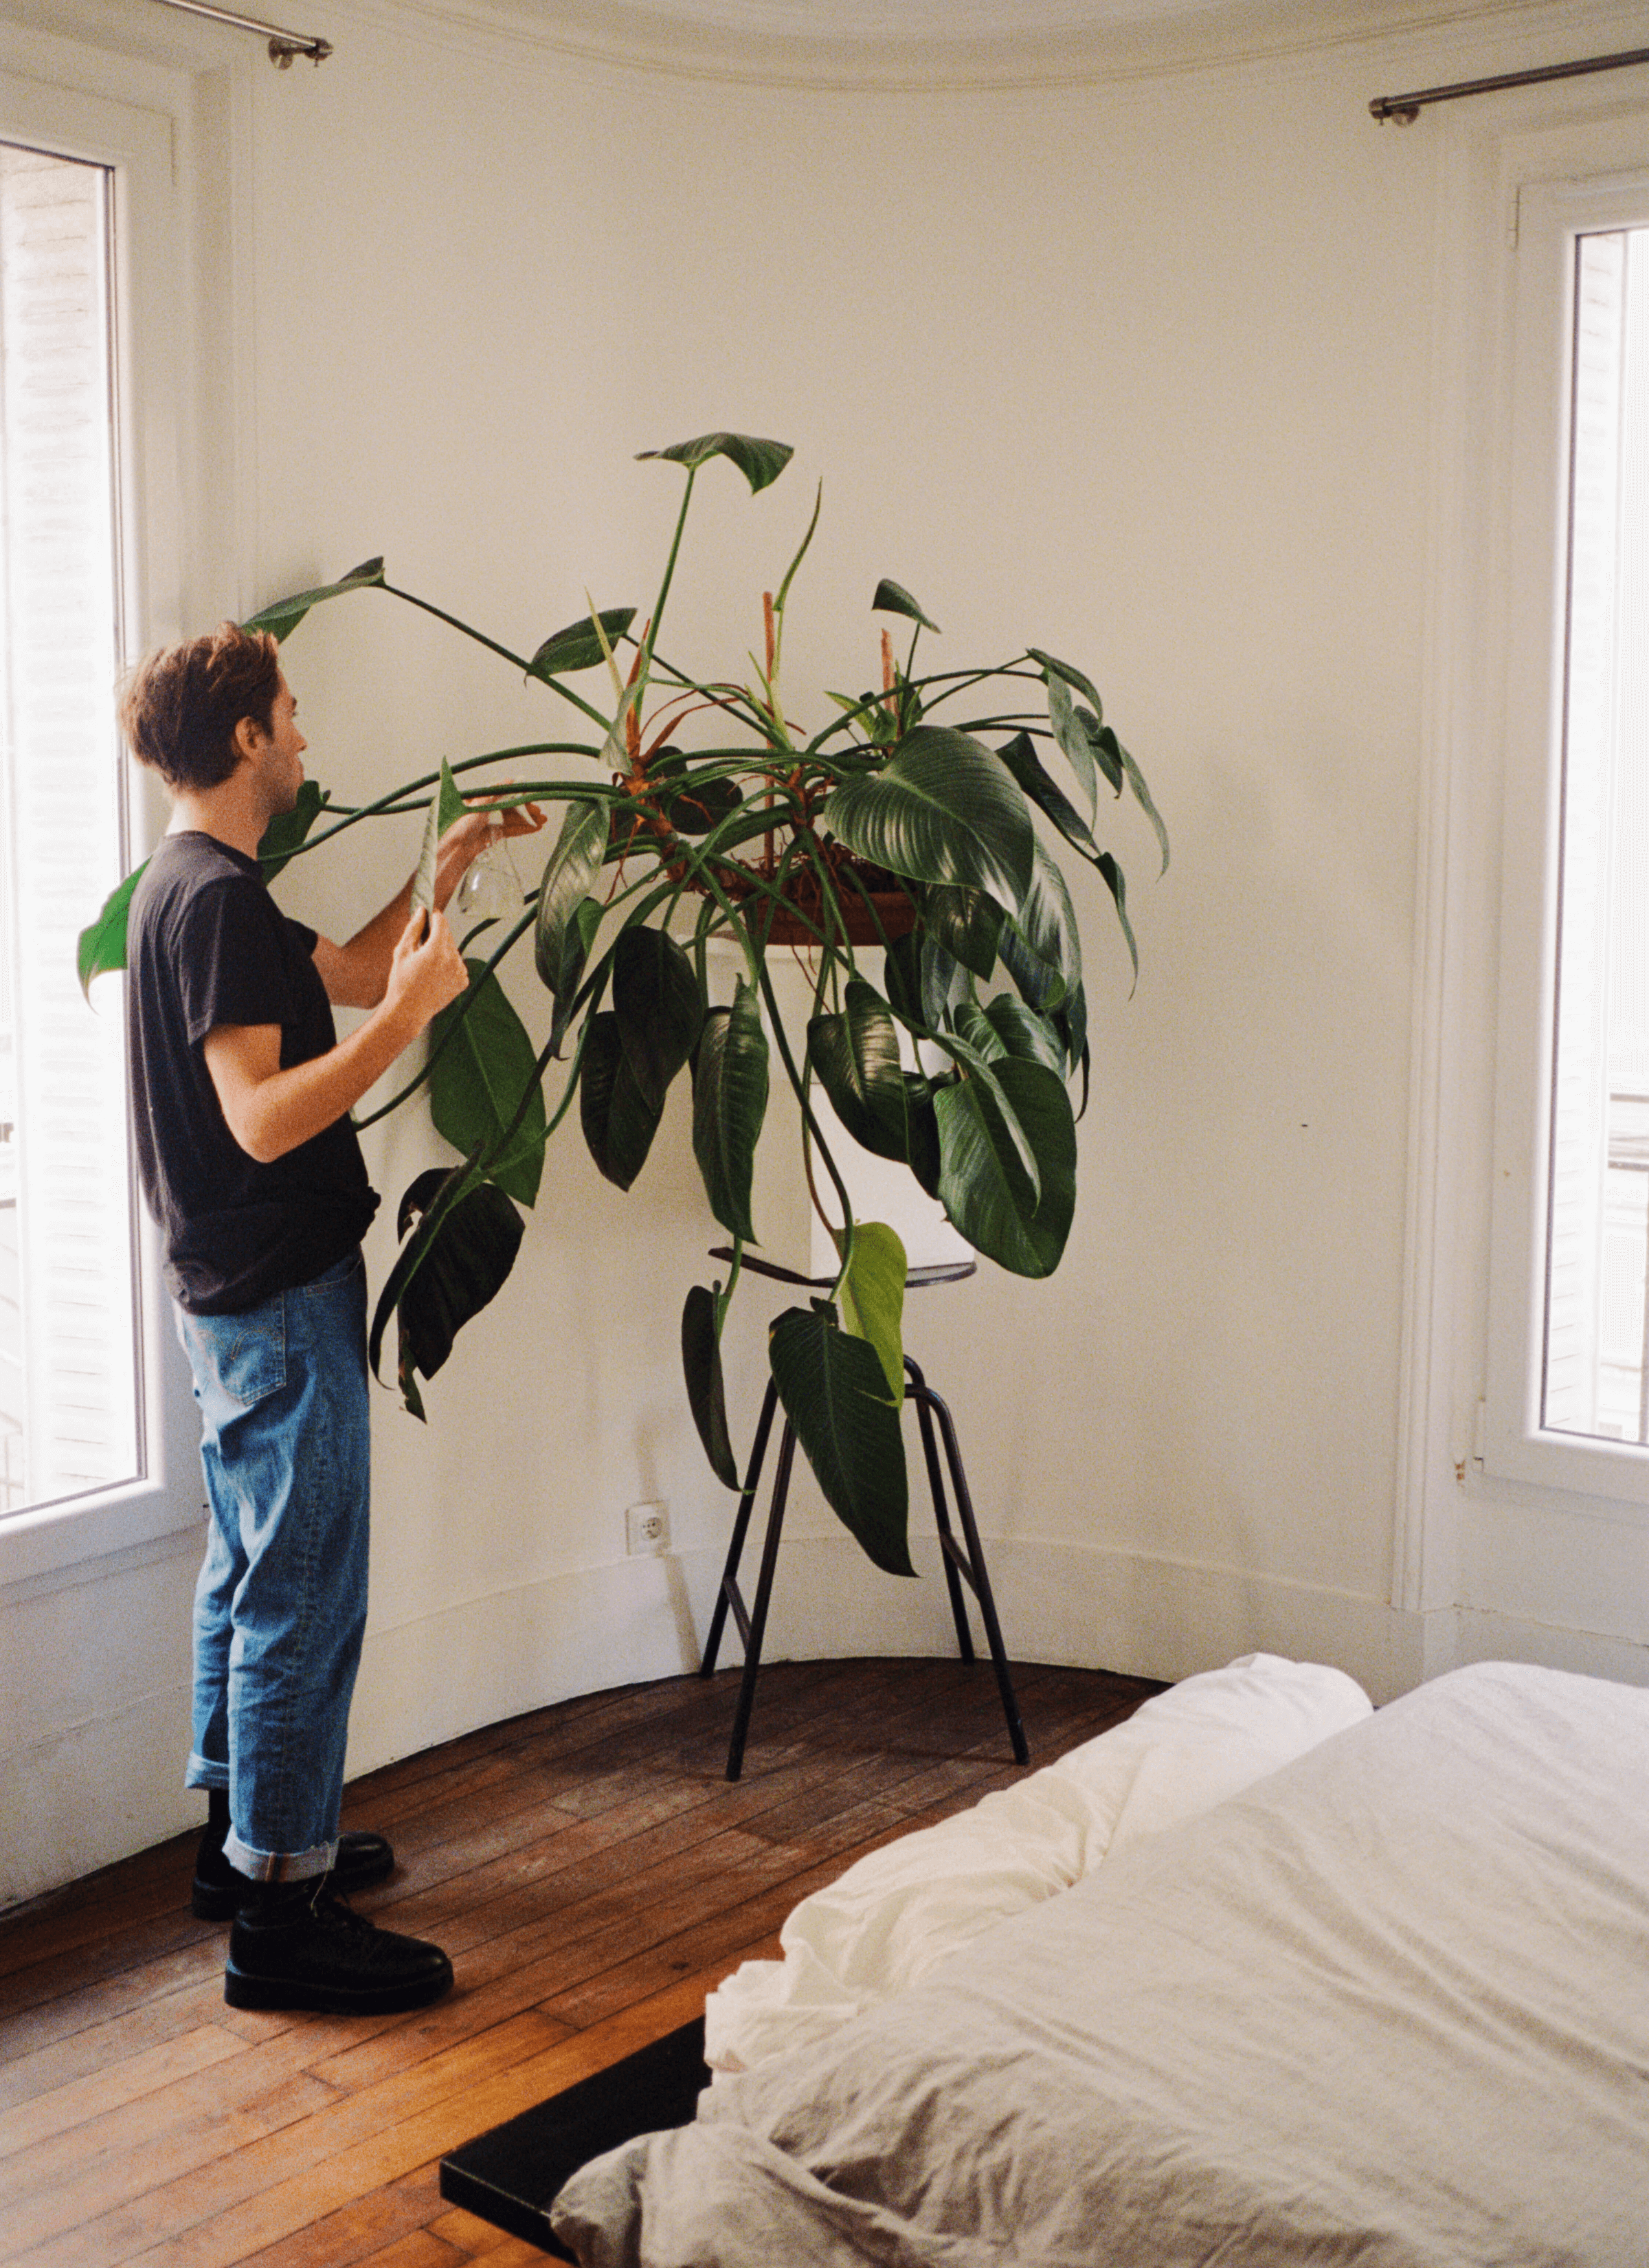 Toni is misting the Philodendron erubescens that sit on a chair in the corner of the room. He is wearing a black t-shirt, blue jeans and a pair of black shoes and there are some windows and a bed in the room.